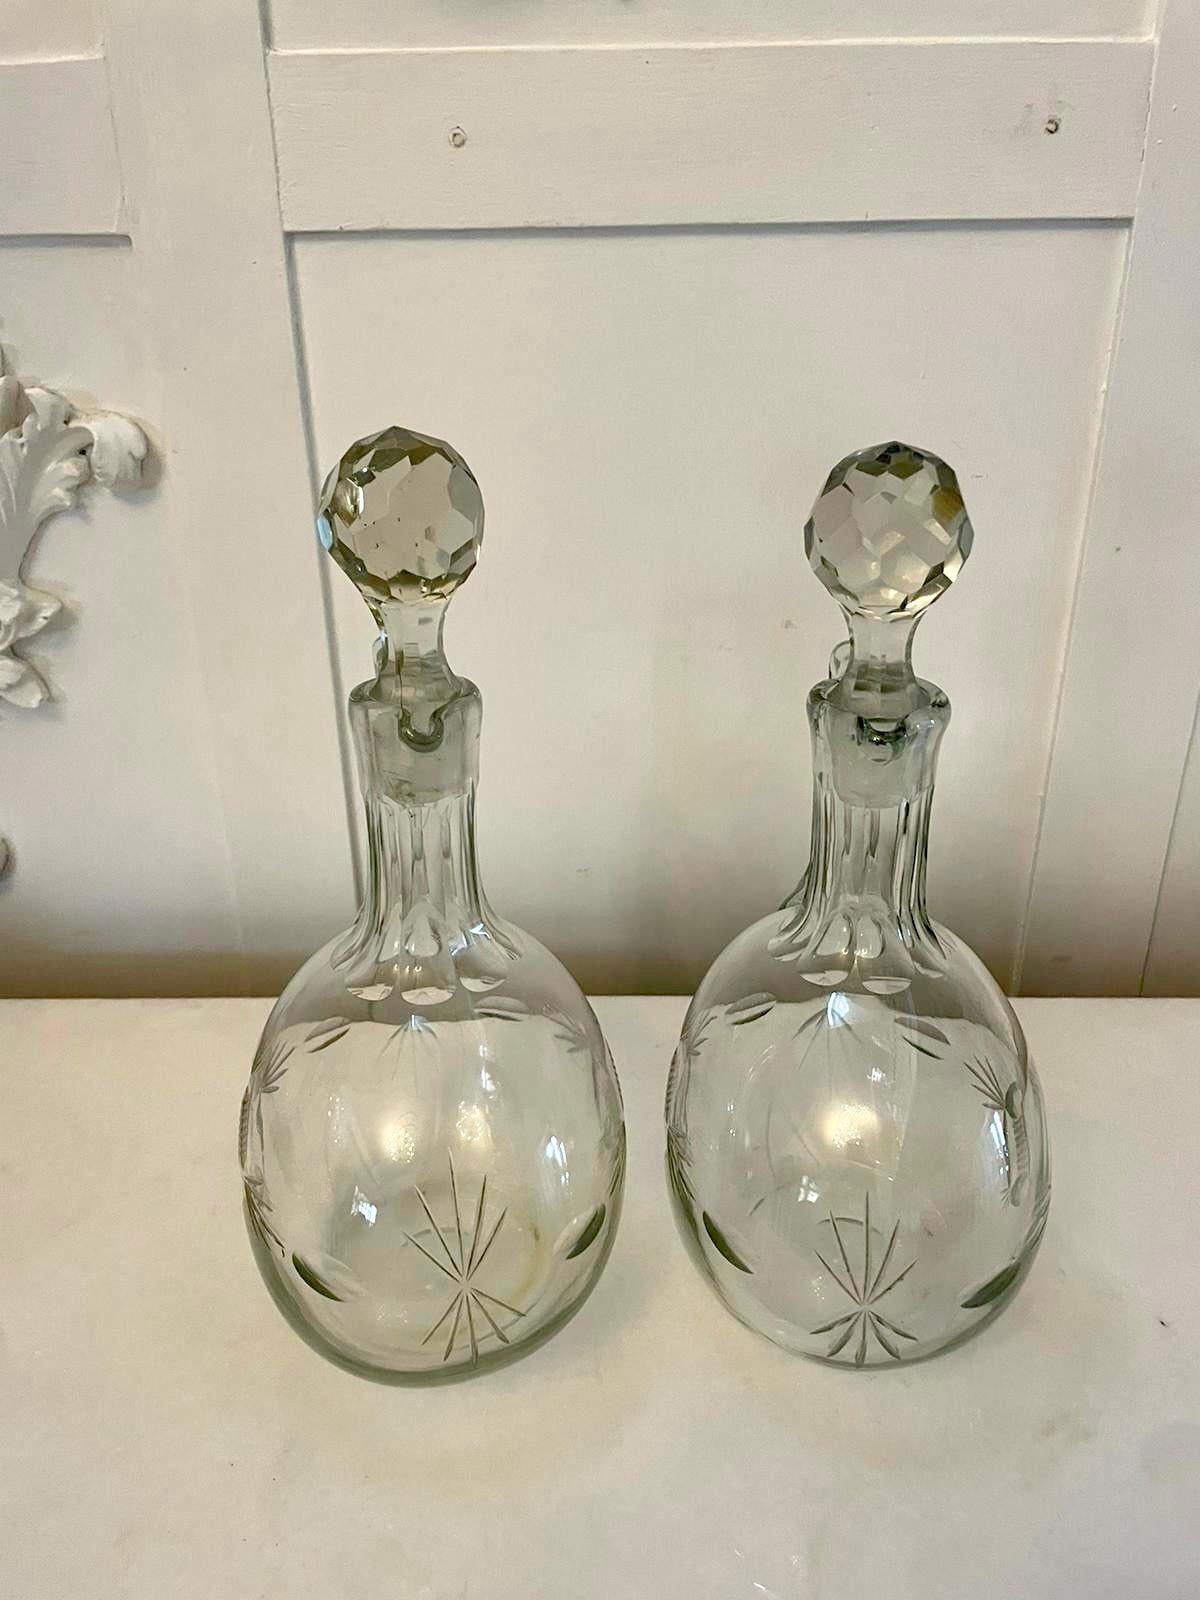 Pair of quality antique Victorian cut glass decanters having a pair of quality antique Victorian cut glass decanters with shaped handles and original stoppers 

In lovely original perfect condition

Dimensions:
Height 27 cm (10.62 in)
Width 15